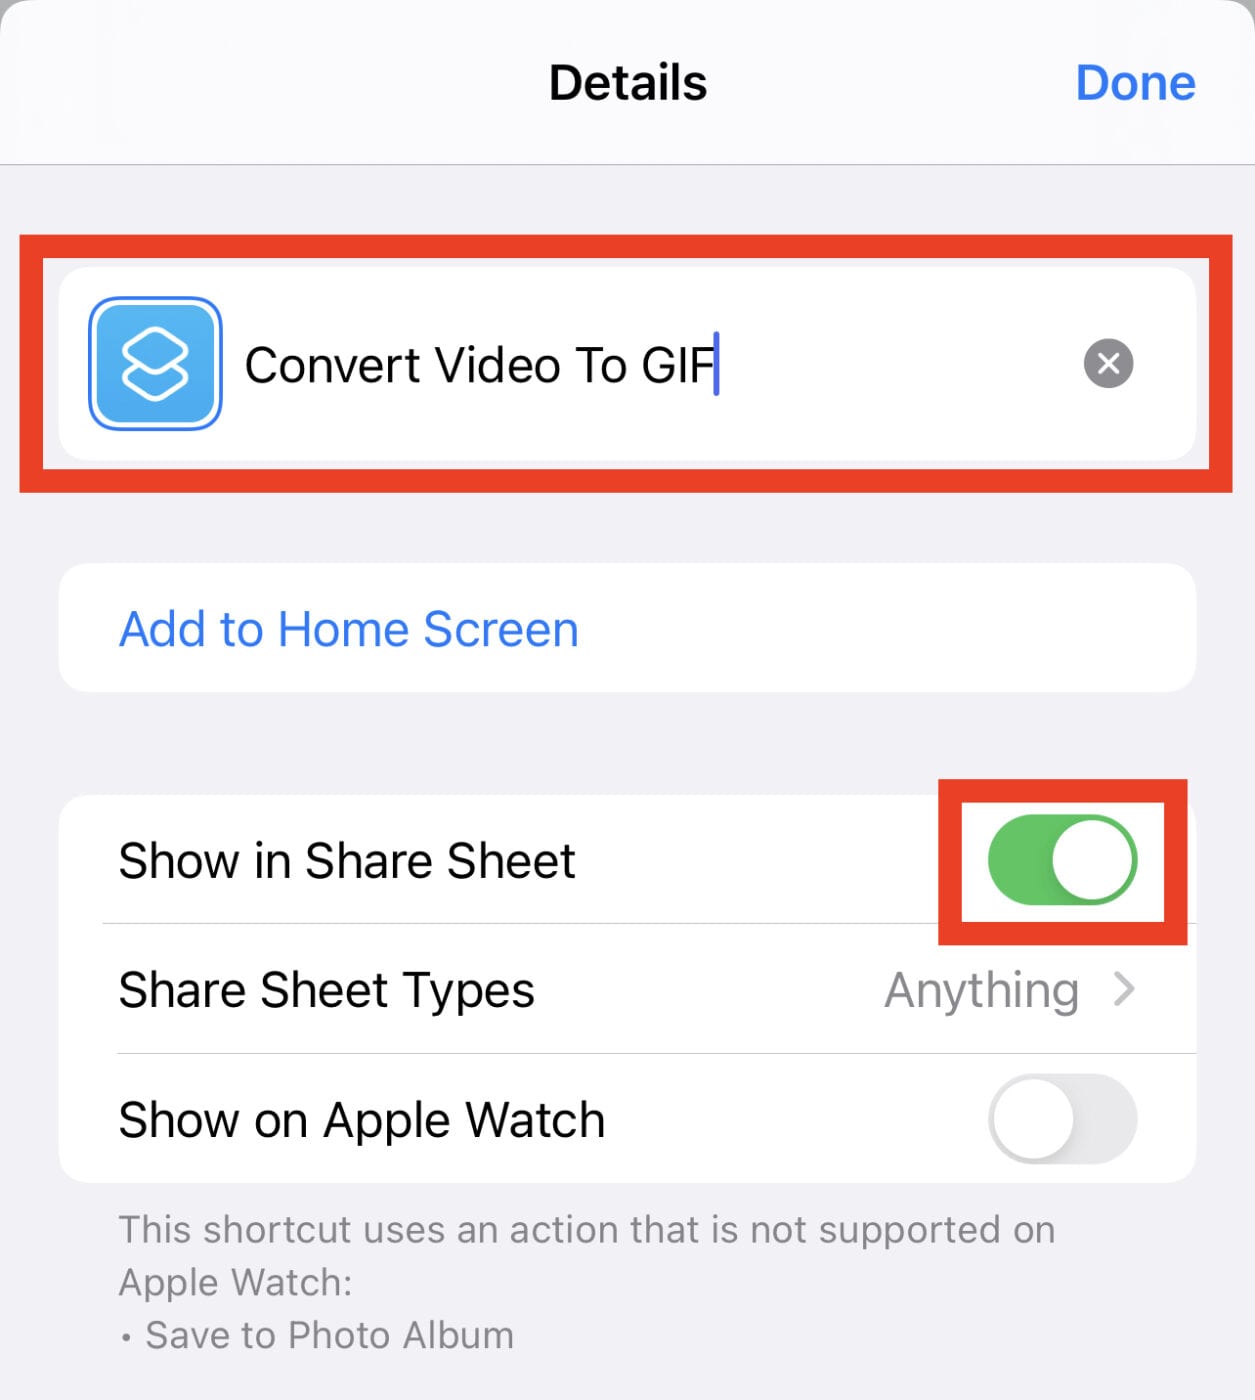 Give the Shortcut a name, and tap Show in Share Sheet